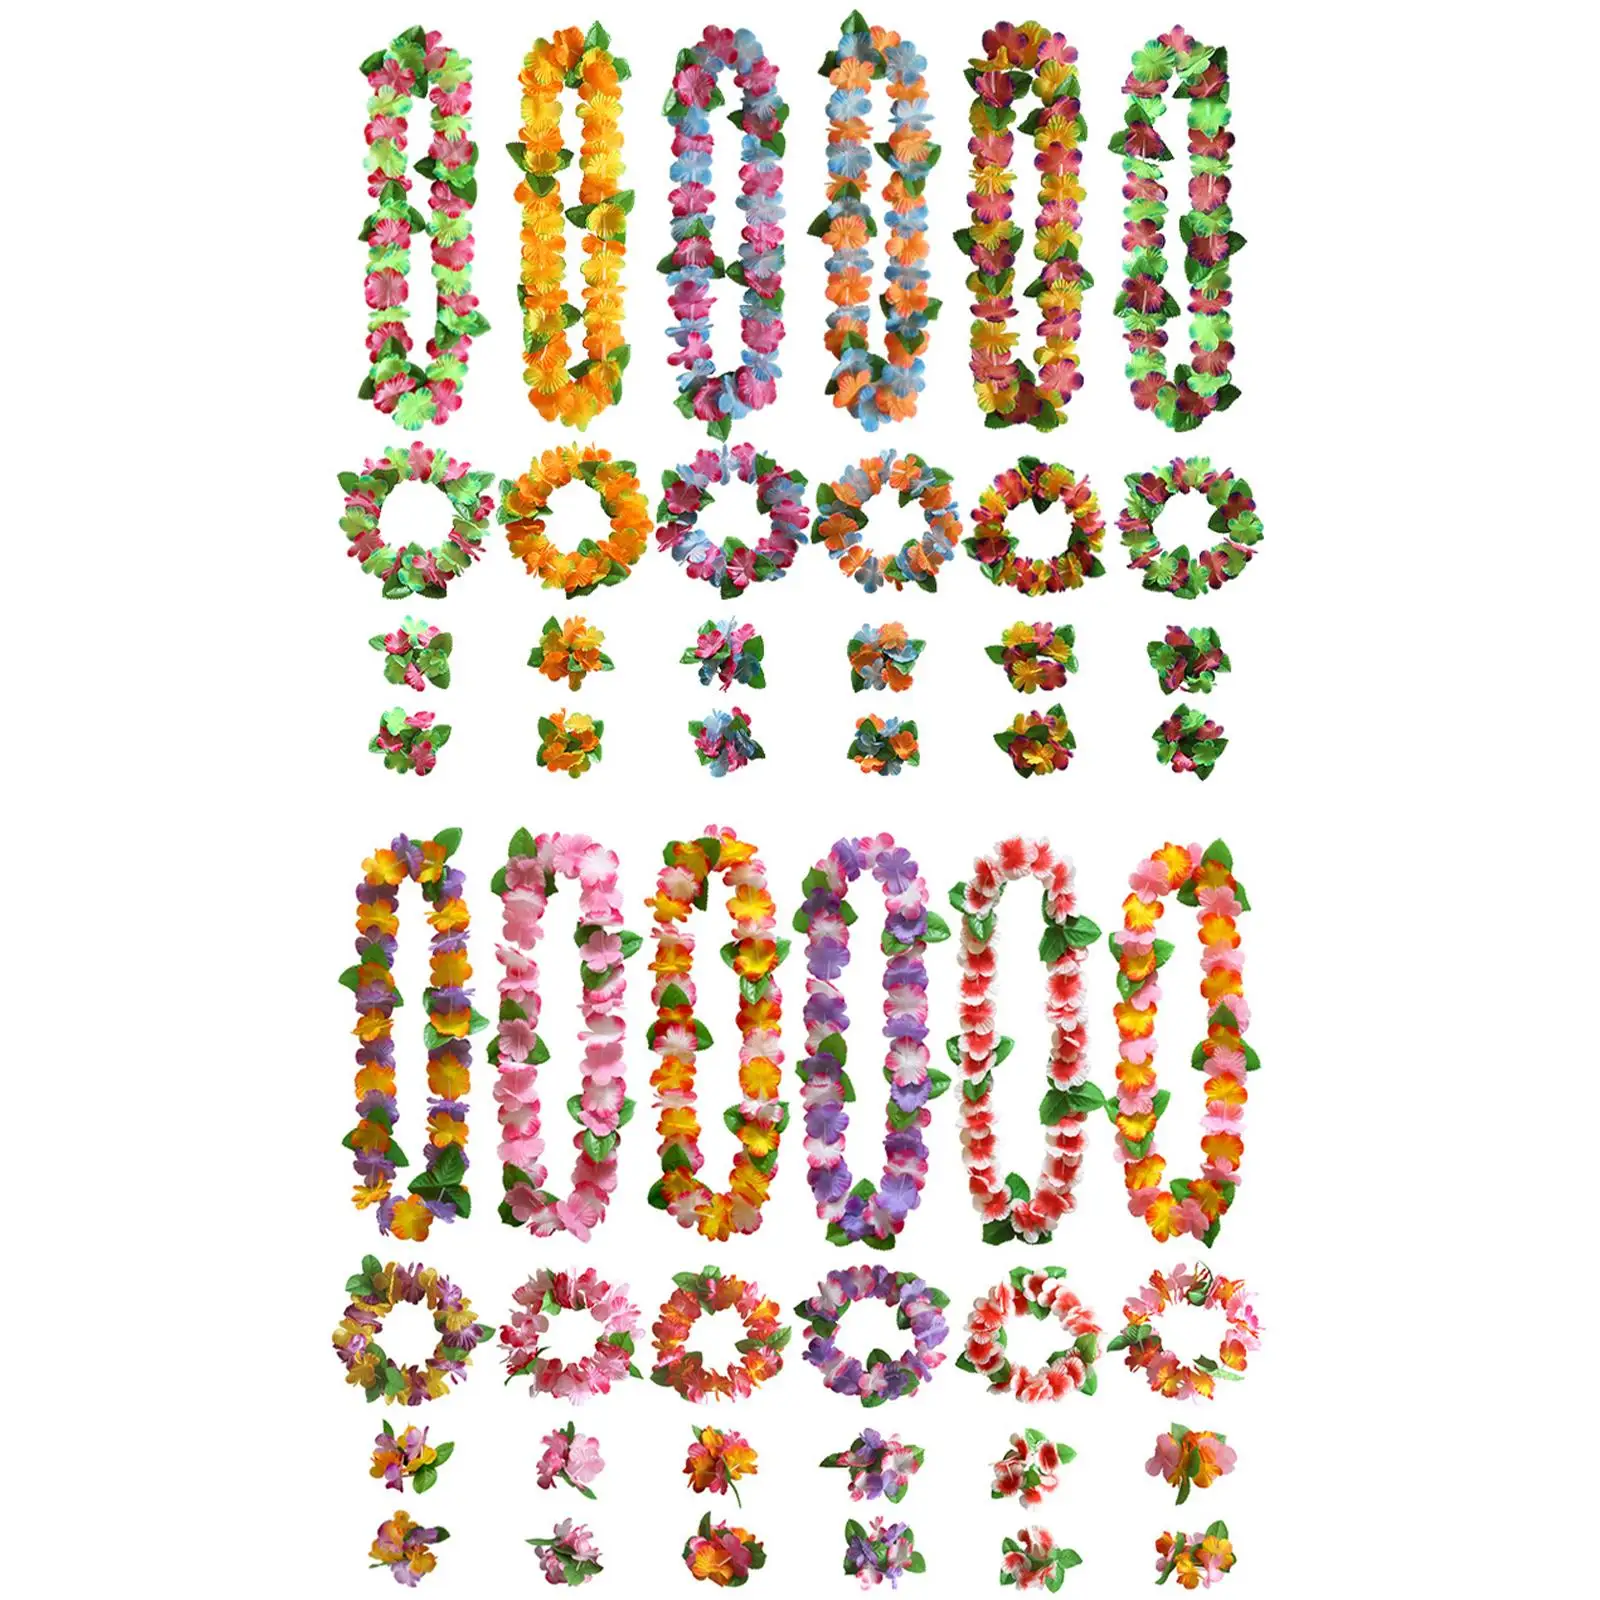 Hawaiian Leis Wearing A Tropical Flower Necklace for Decoration